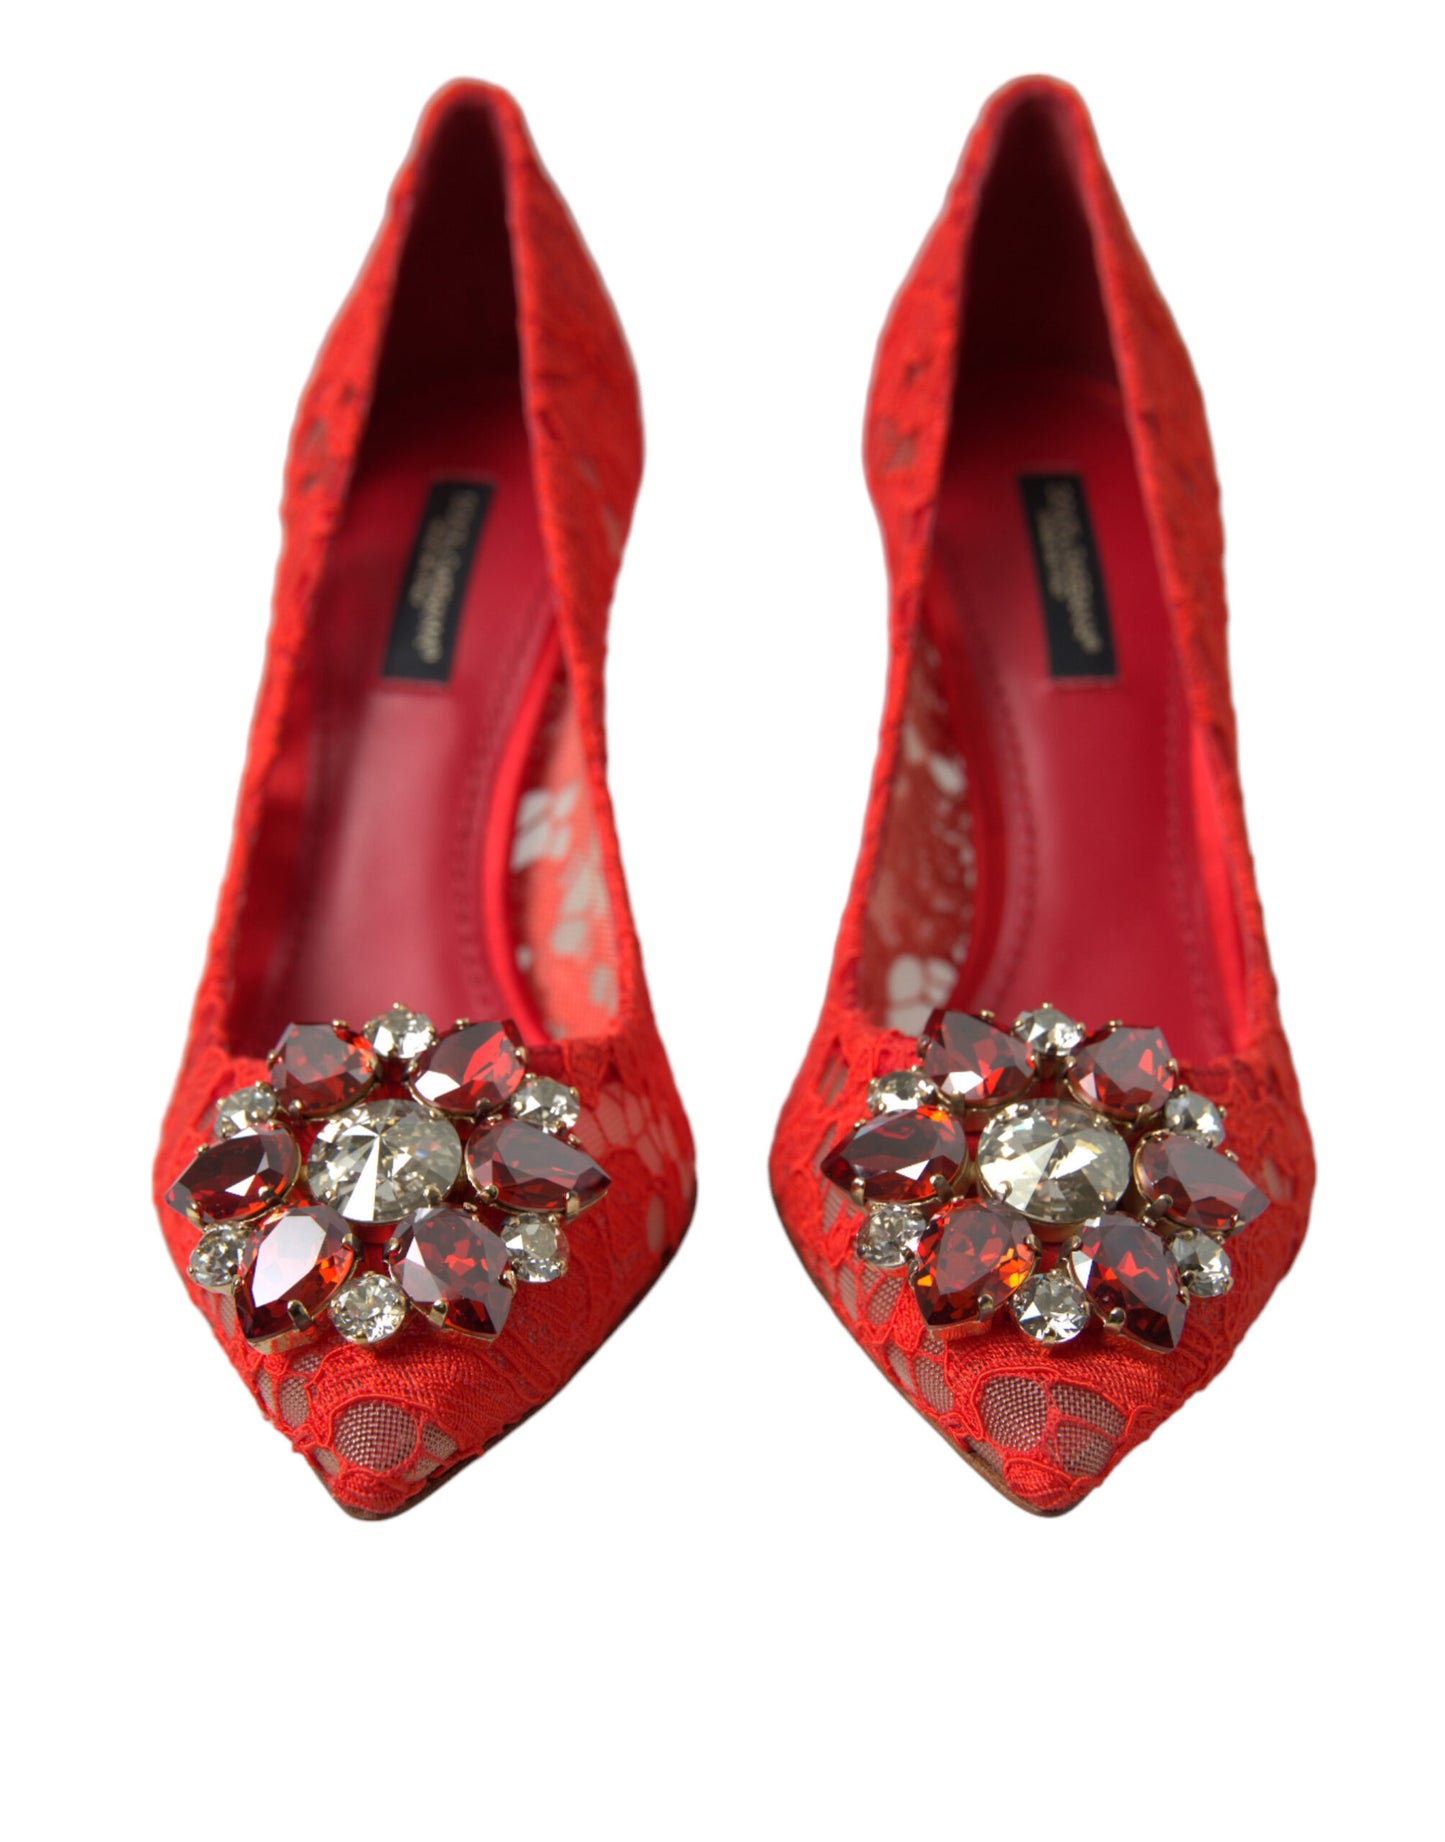 Exquisite Crystal-Embellished Red Lace Heels